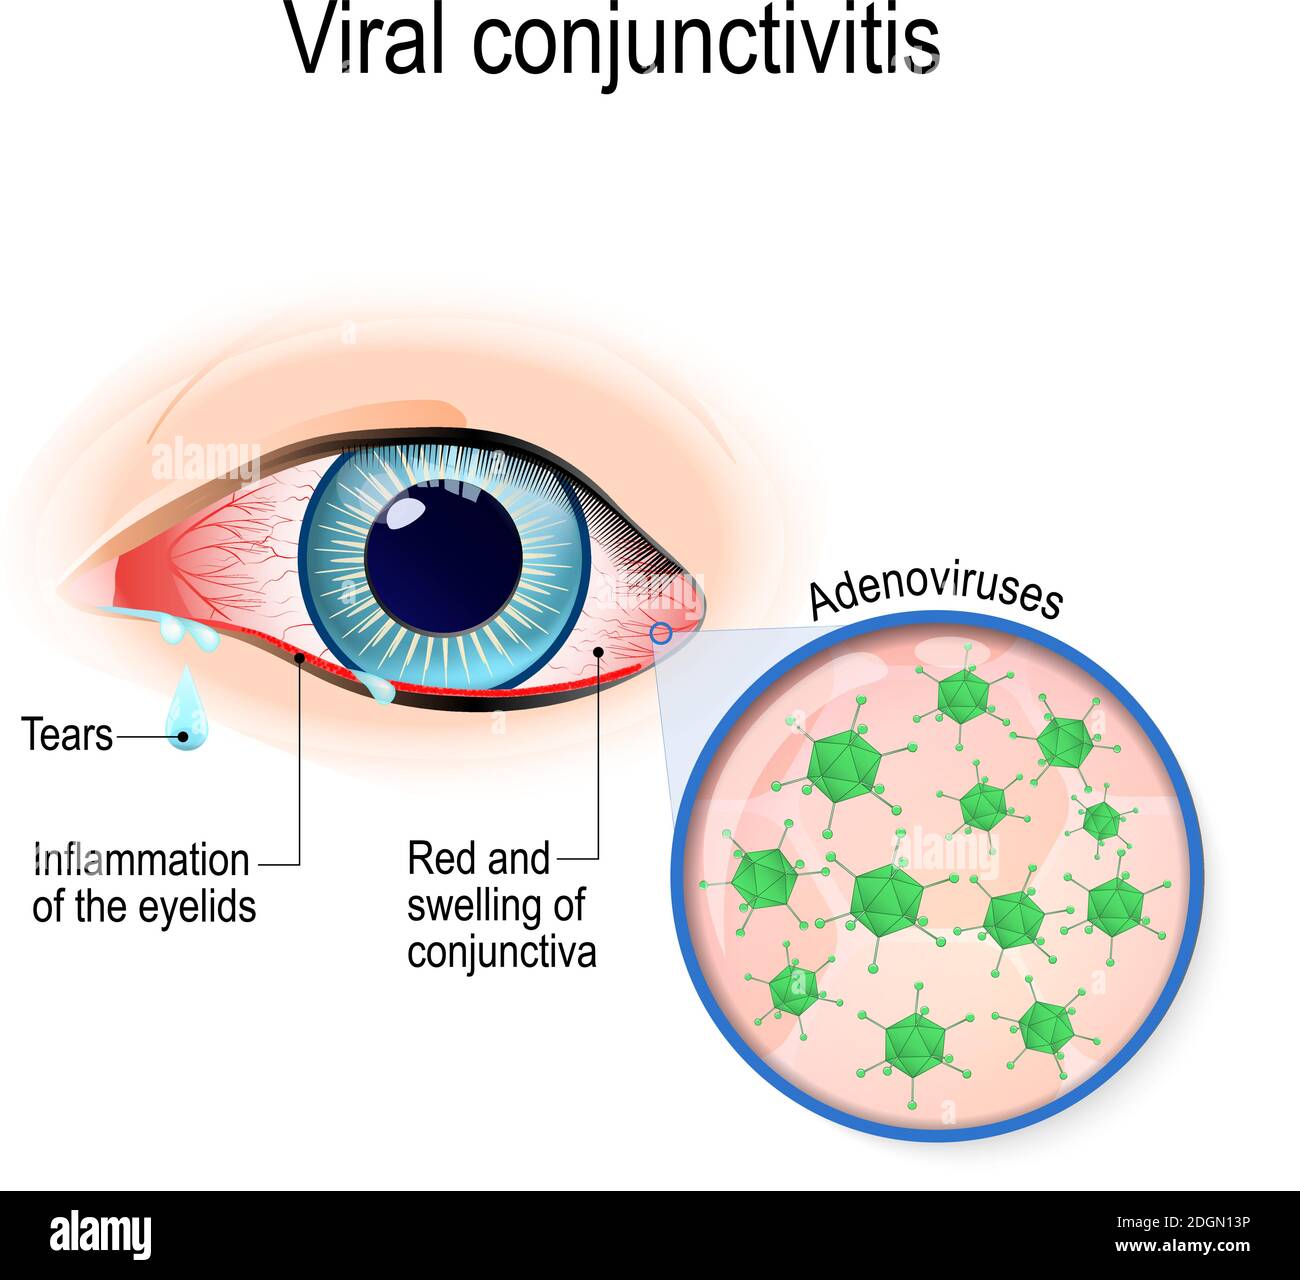 Viral conjunctivitis. Adenoviruses is the cause of viral conjunctivitis Stock Vector